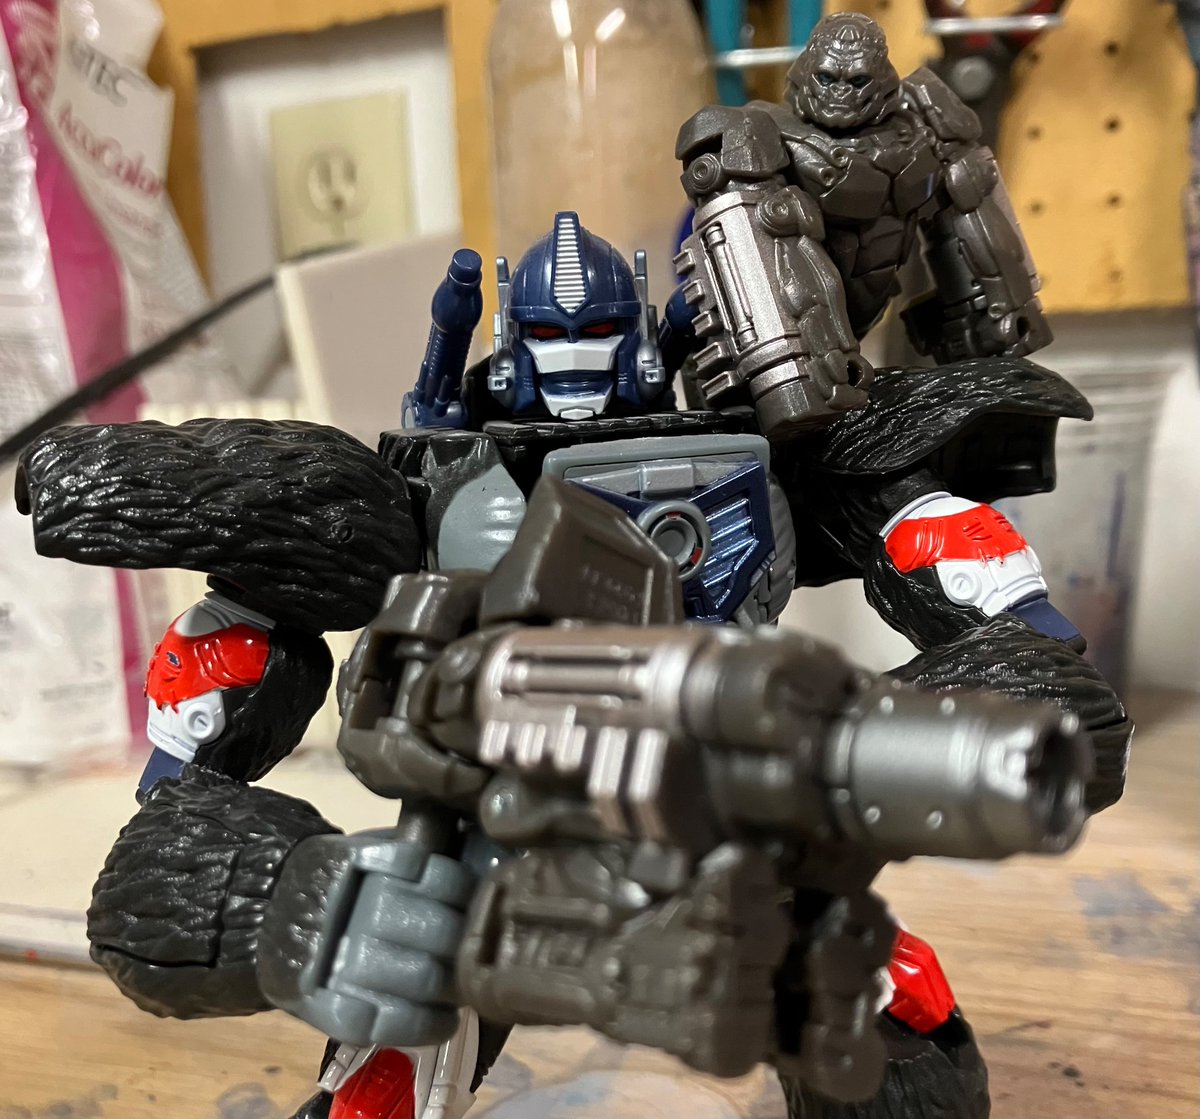 In a shock to absolutely no one, a tiny Optimus Primal that turns into a mini hand cannon is absolute perfection in toy form.